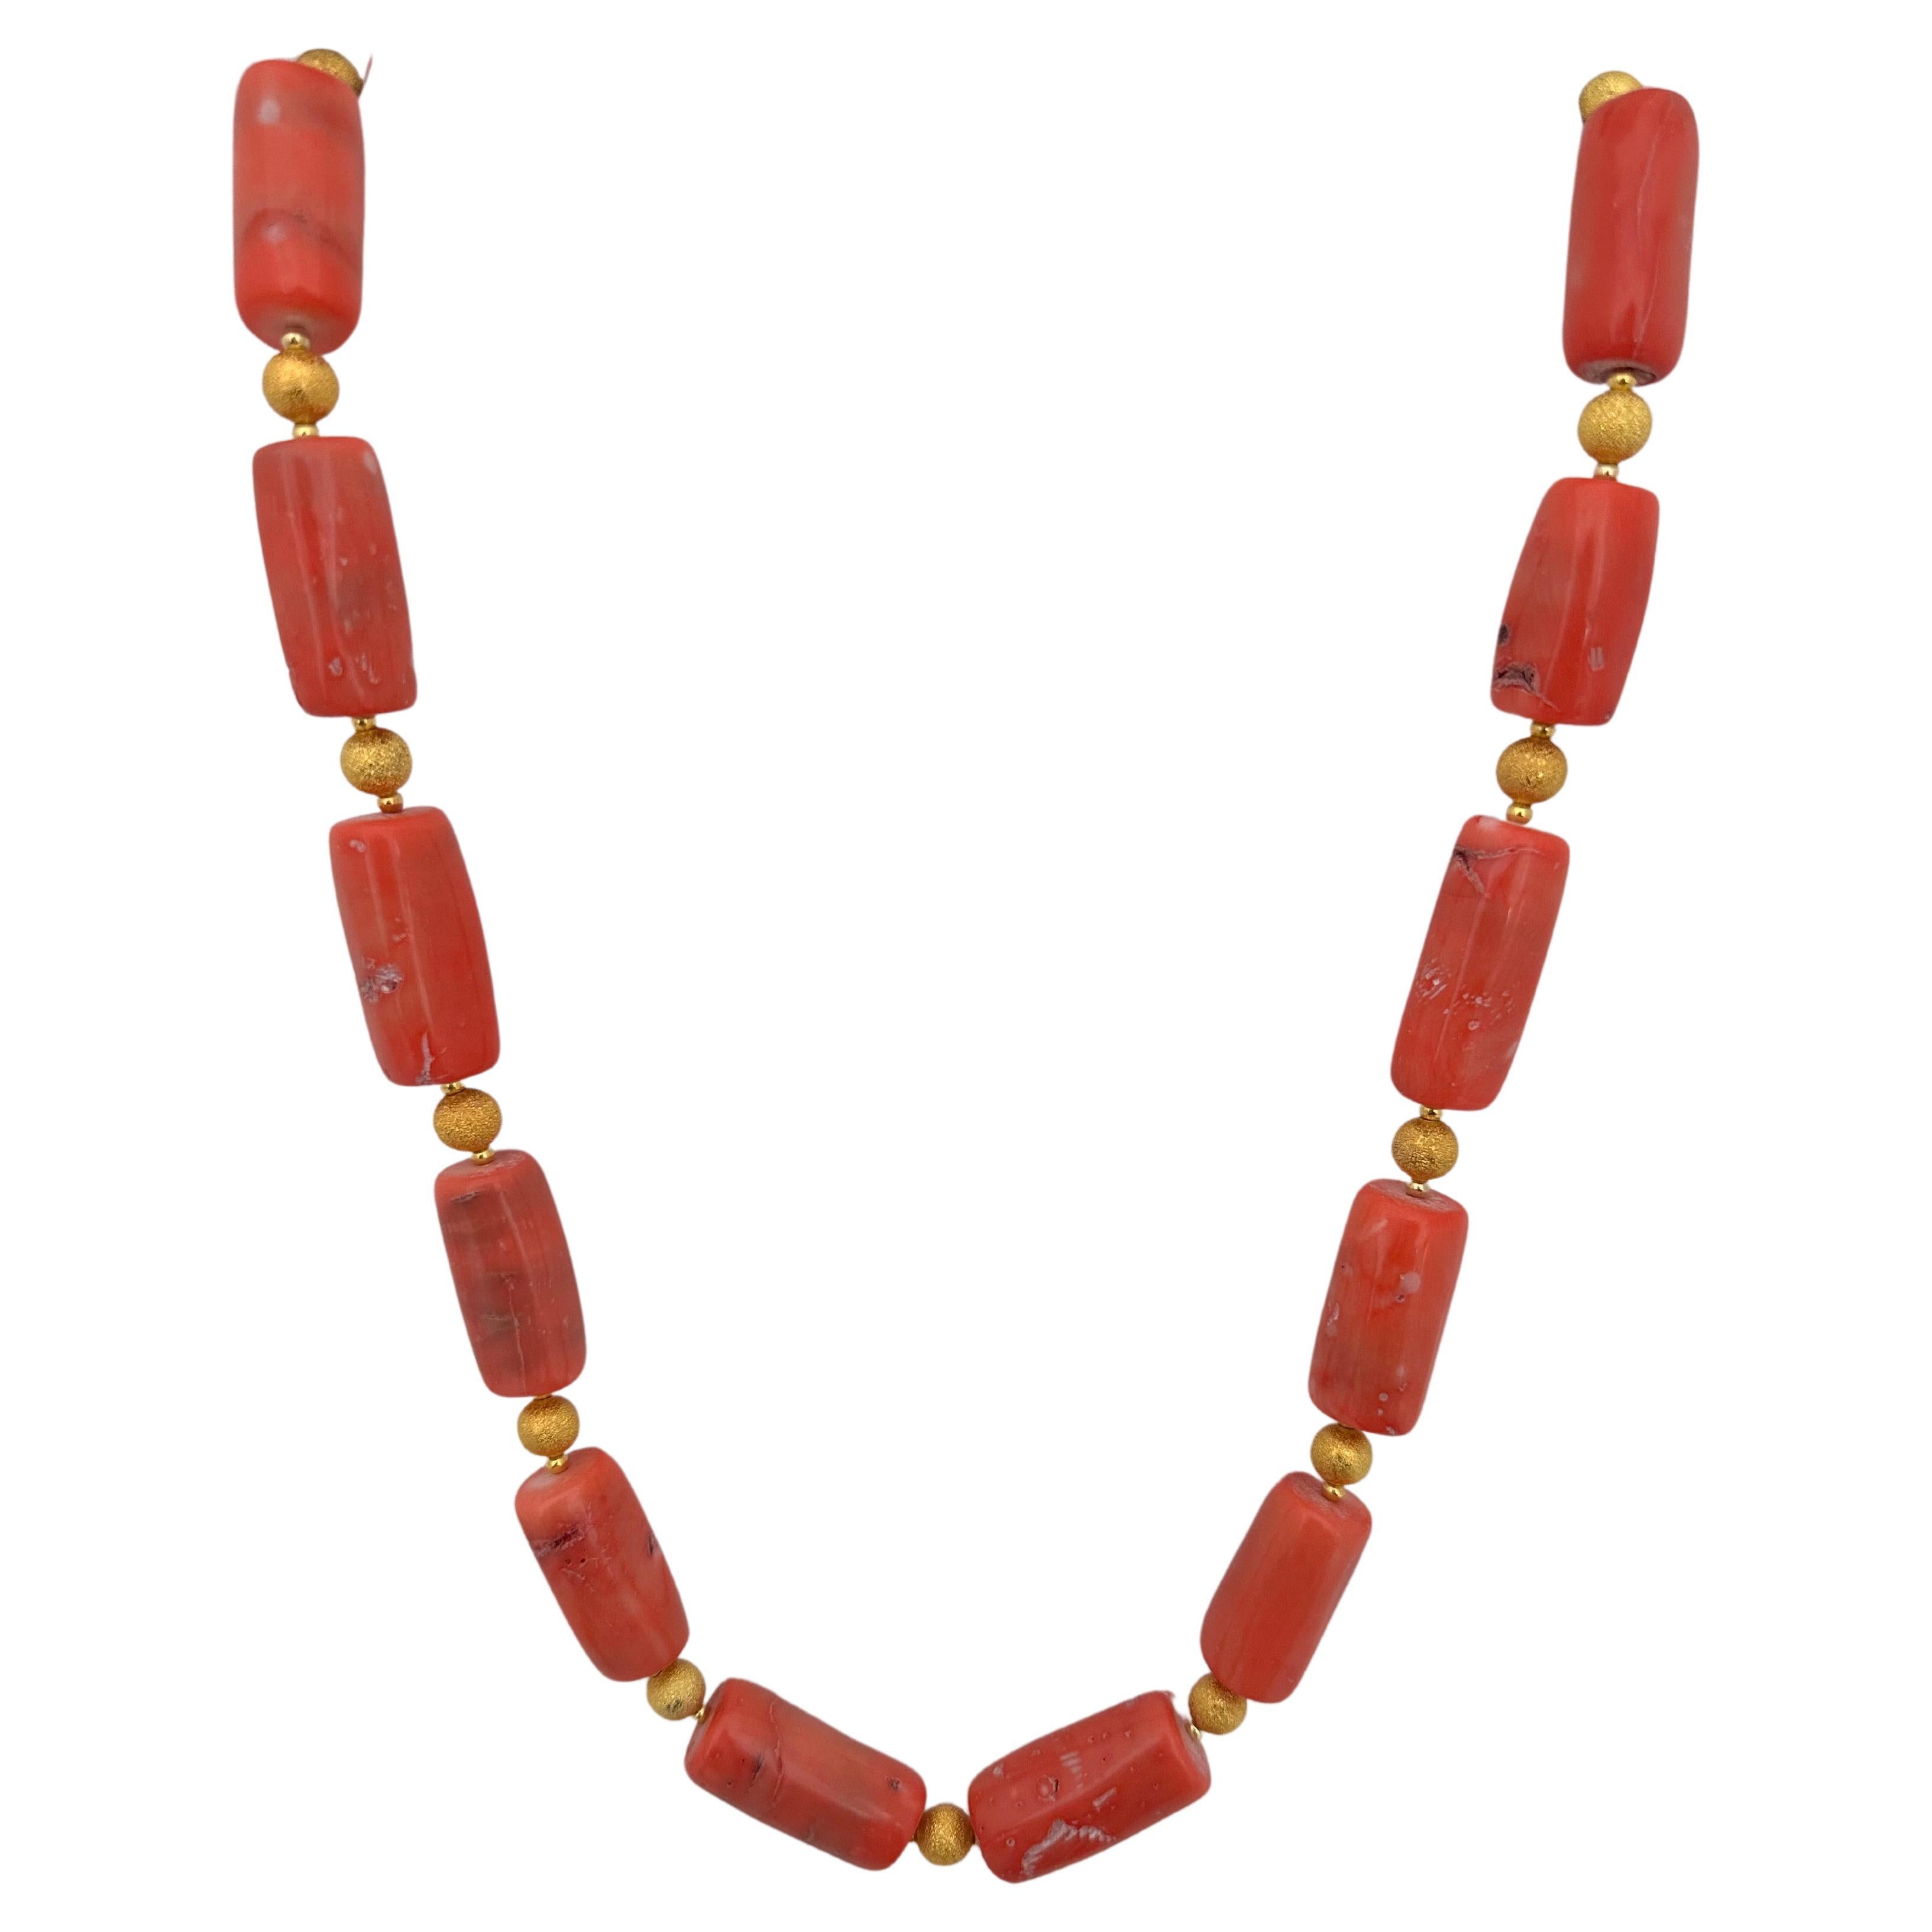 Handmade Gold Plated Beads & Salmon Barrel Shape Coral Beaded 26" Necklace #C38 For Sale